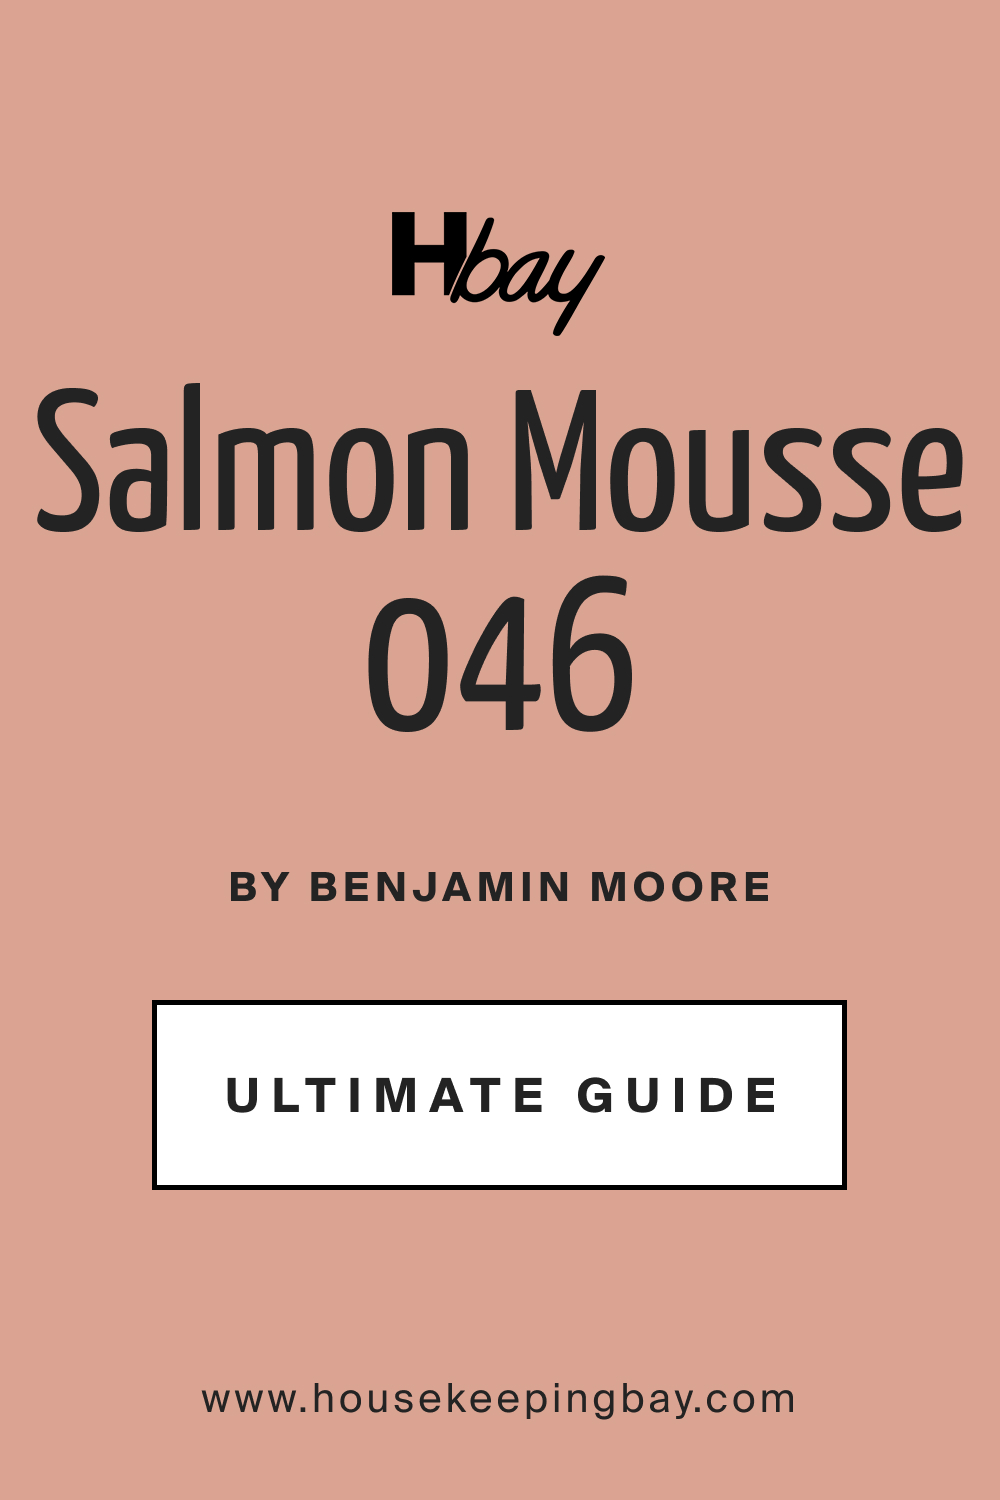 BM Salmon Mousse 046 Paint Color by Benjamin Moore Ultimate Guide